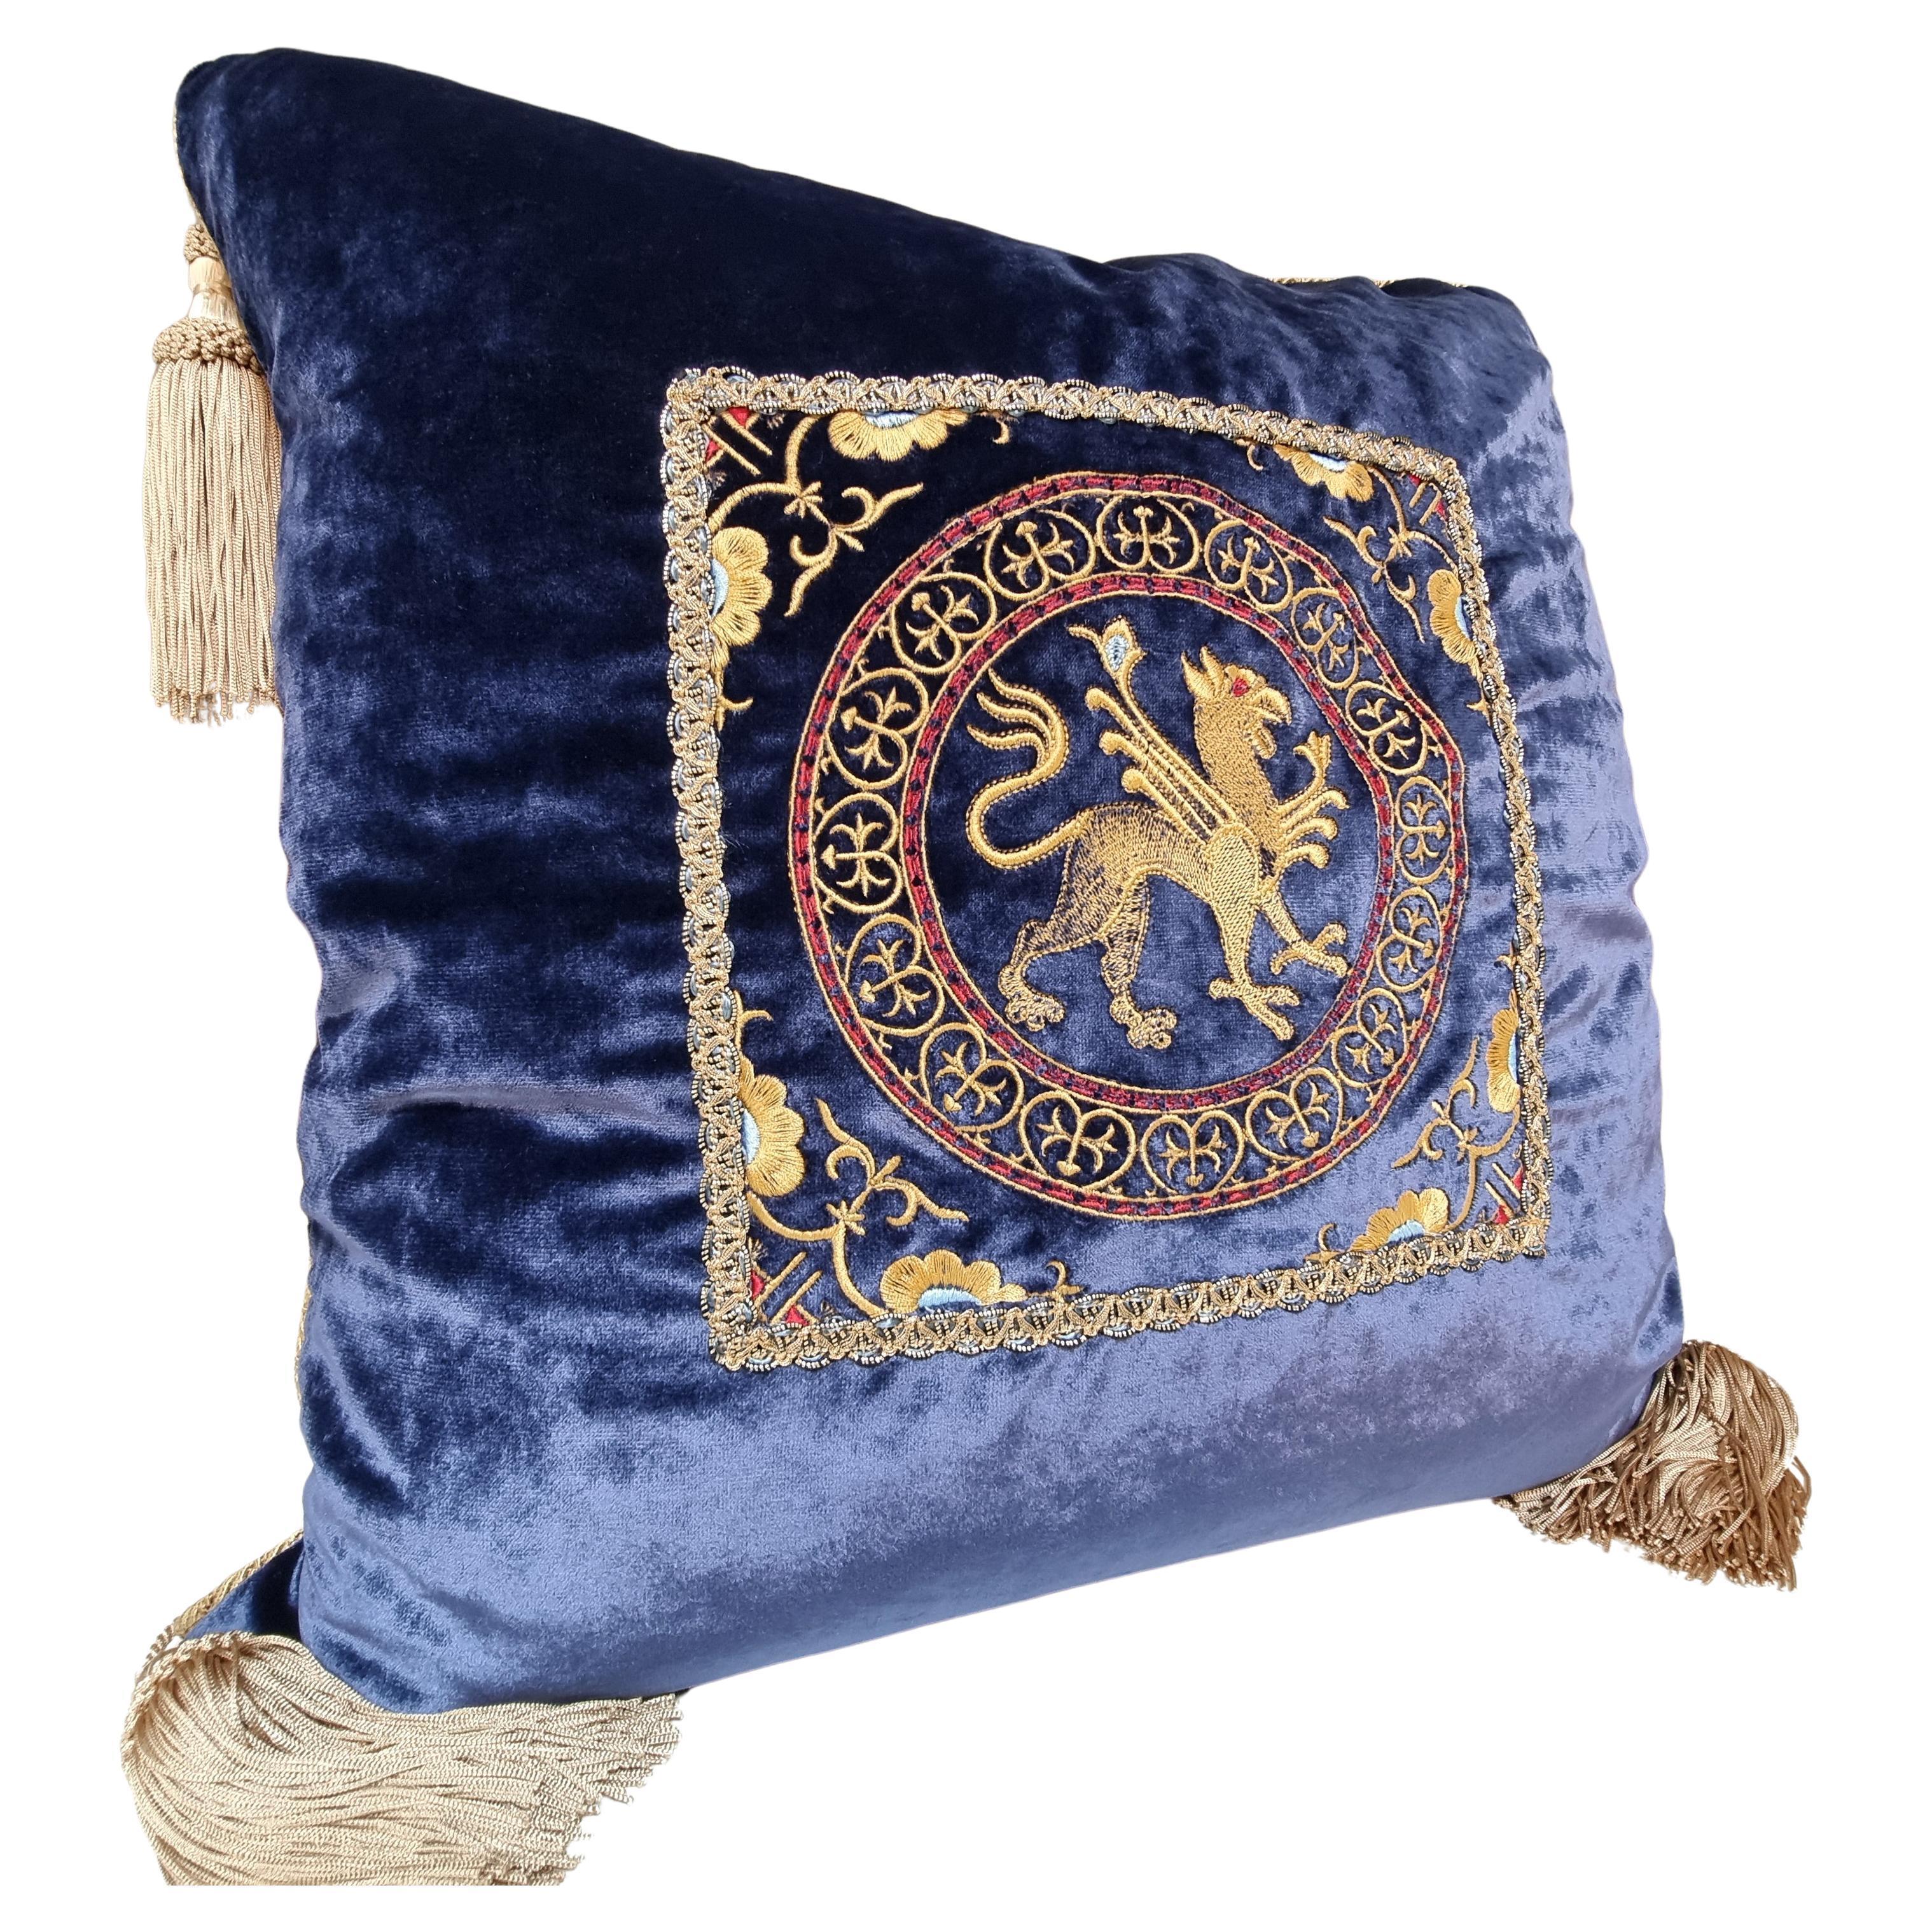 This amazing decorative pillow with beige tassel at the four corners is handmade using Rubelli  velvet in blue color on both sides finished with Houlès  twisted lip cord, embellished with precious embroideries (13th-century design) framed with flat